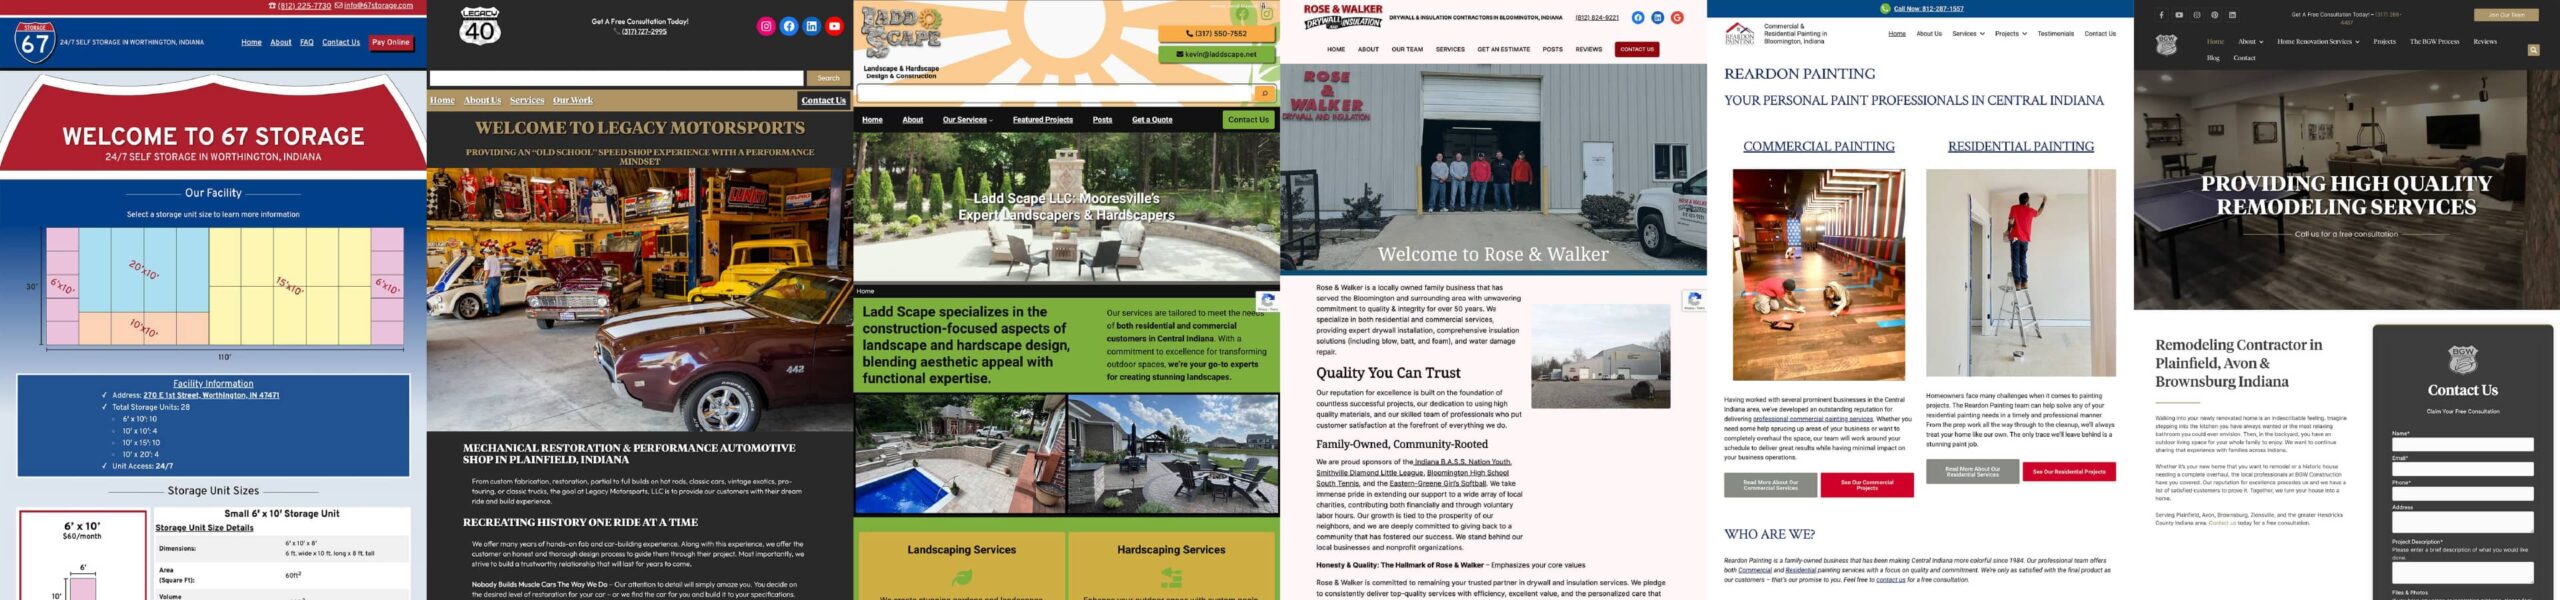 Collage of six client website designs by David Martin Design in Bloomington, Indiana, featuring diverse business sectors including storage, motorsports, landscaping, painting, and remodeling services.